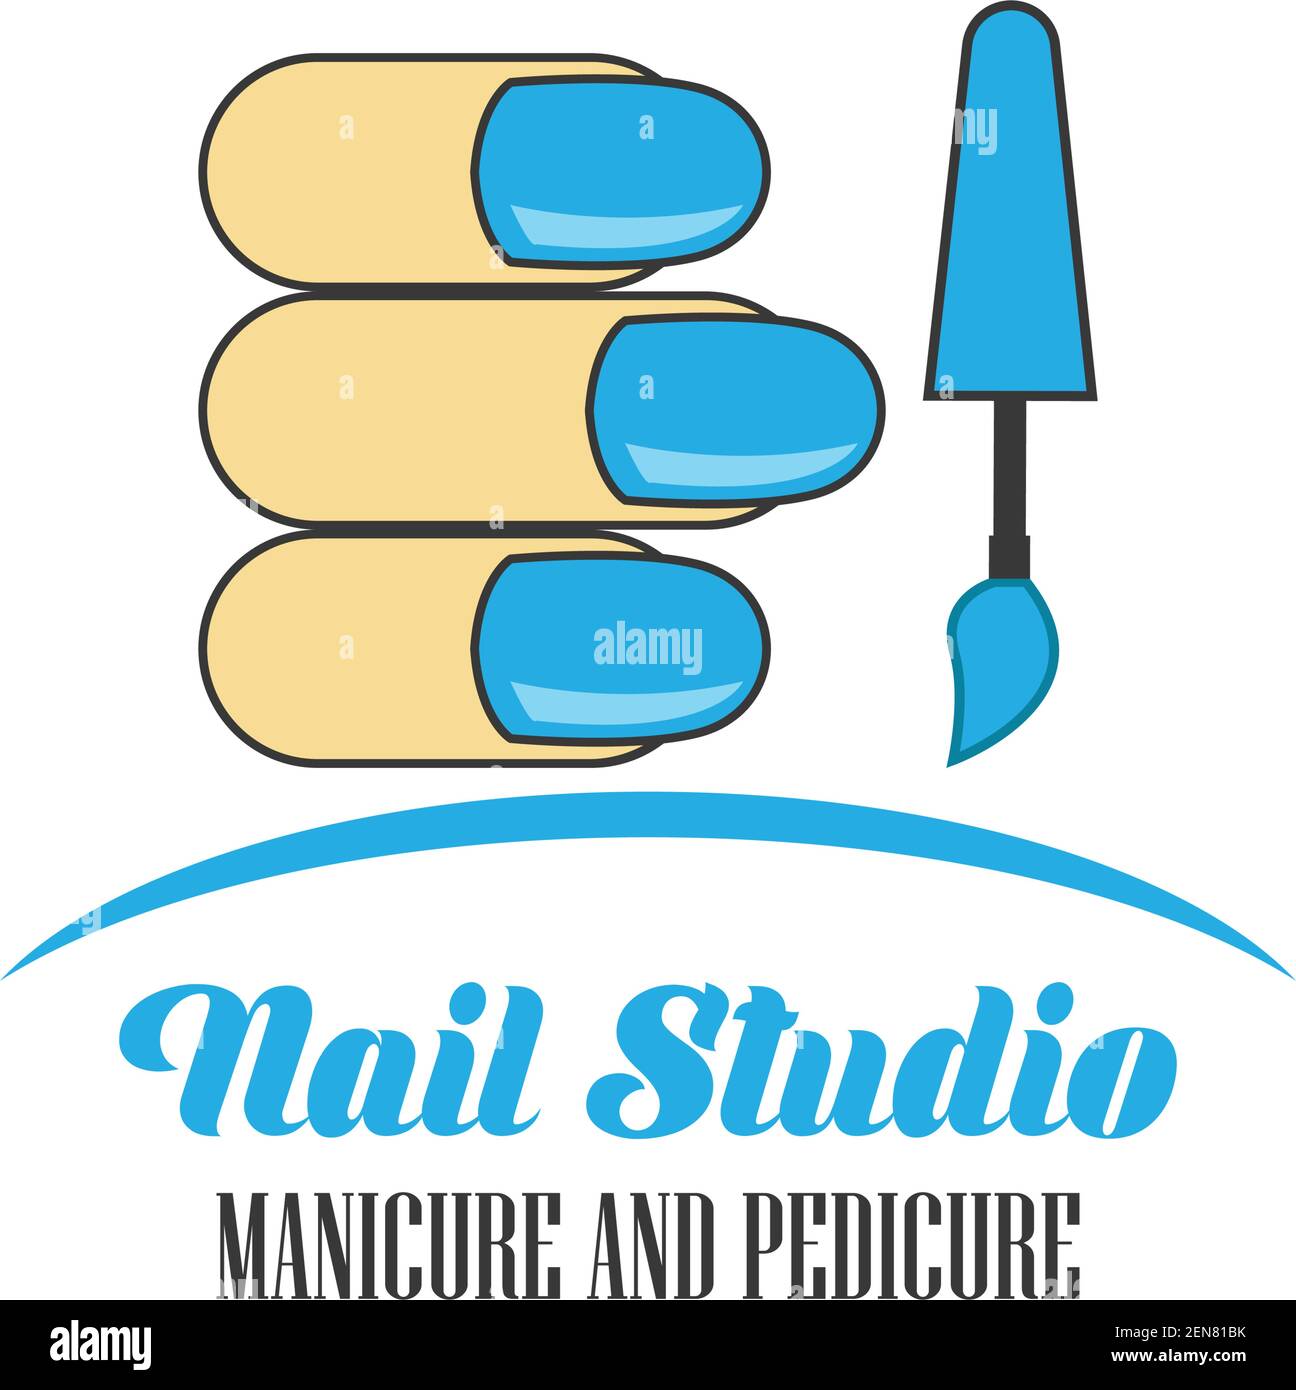 nail salon manicure pedicure logo with text space for your tagline slogan, vector illustration Stock Vector